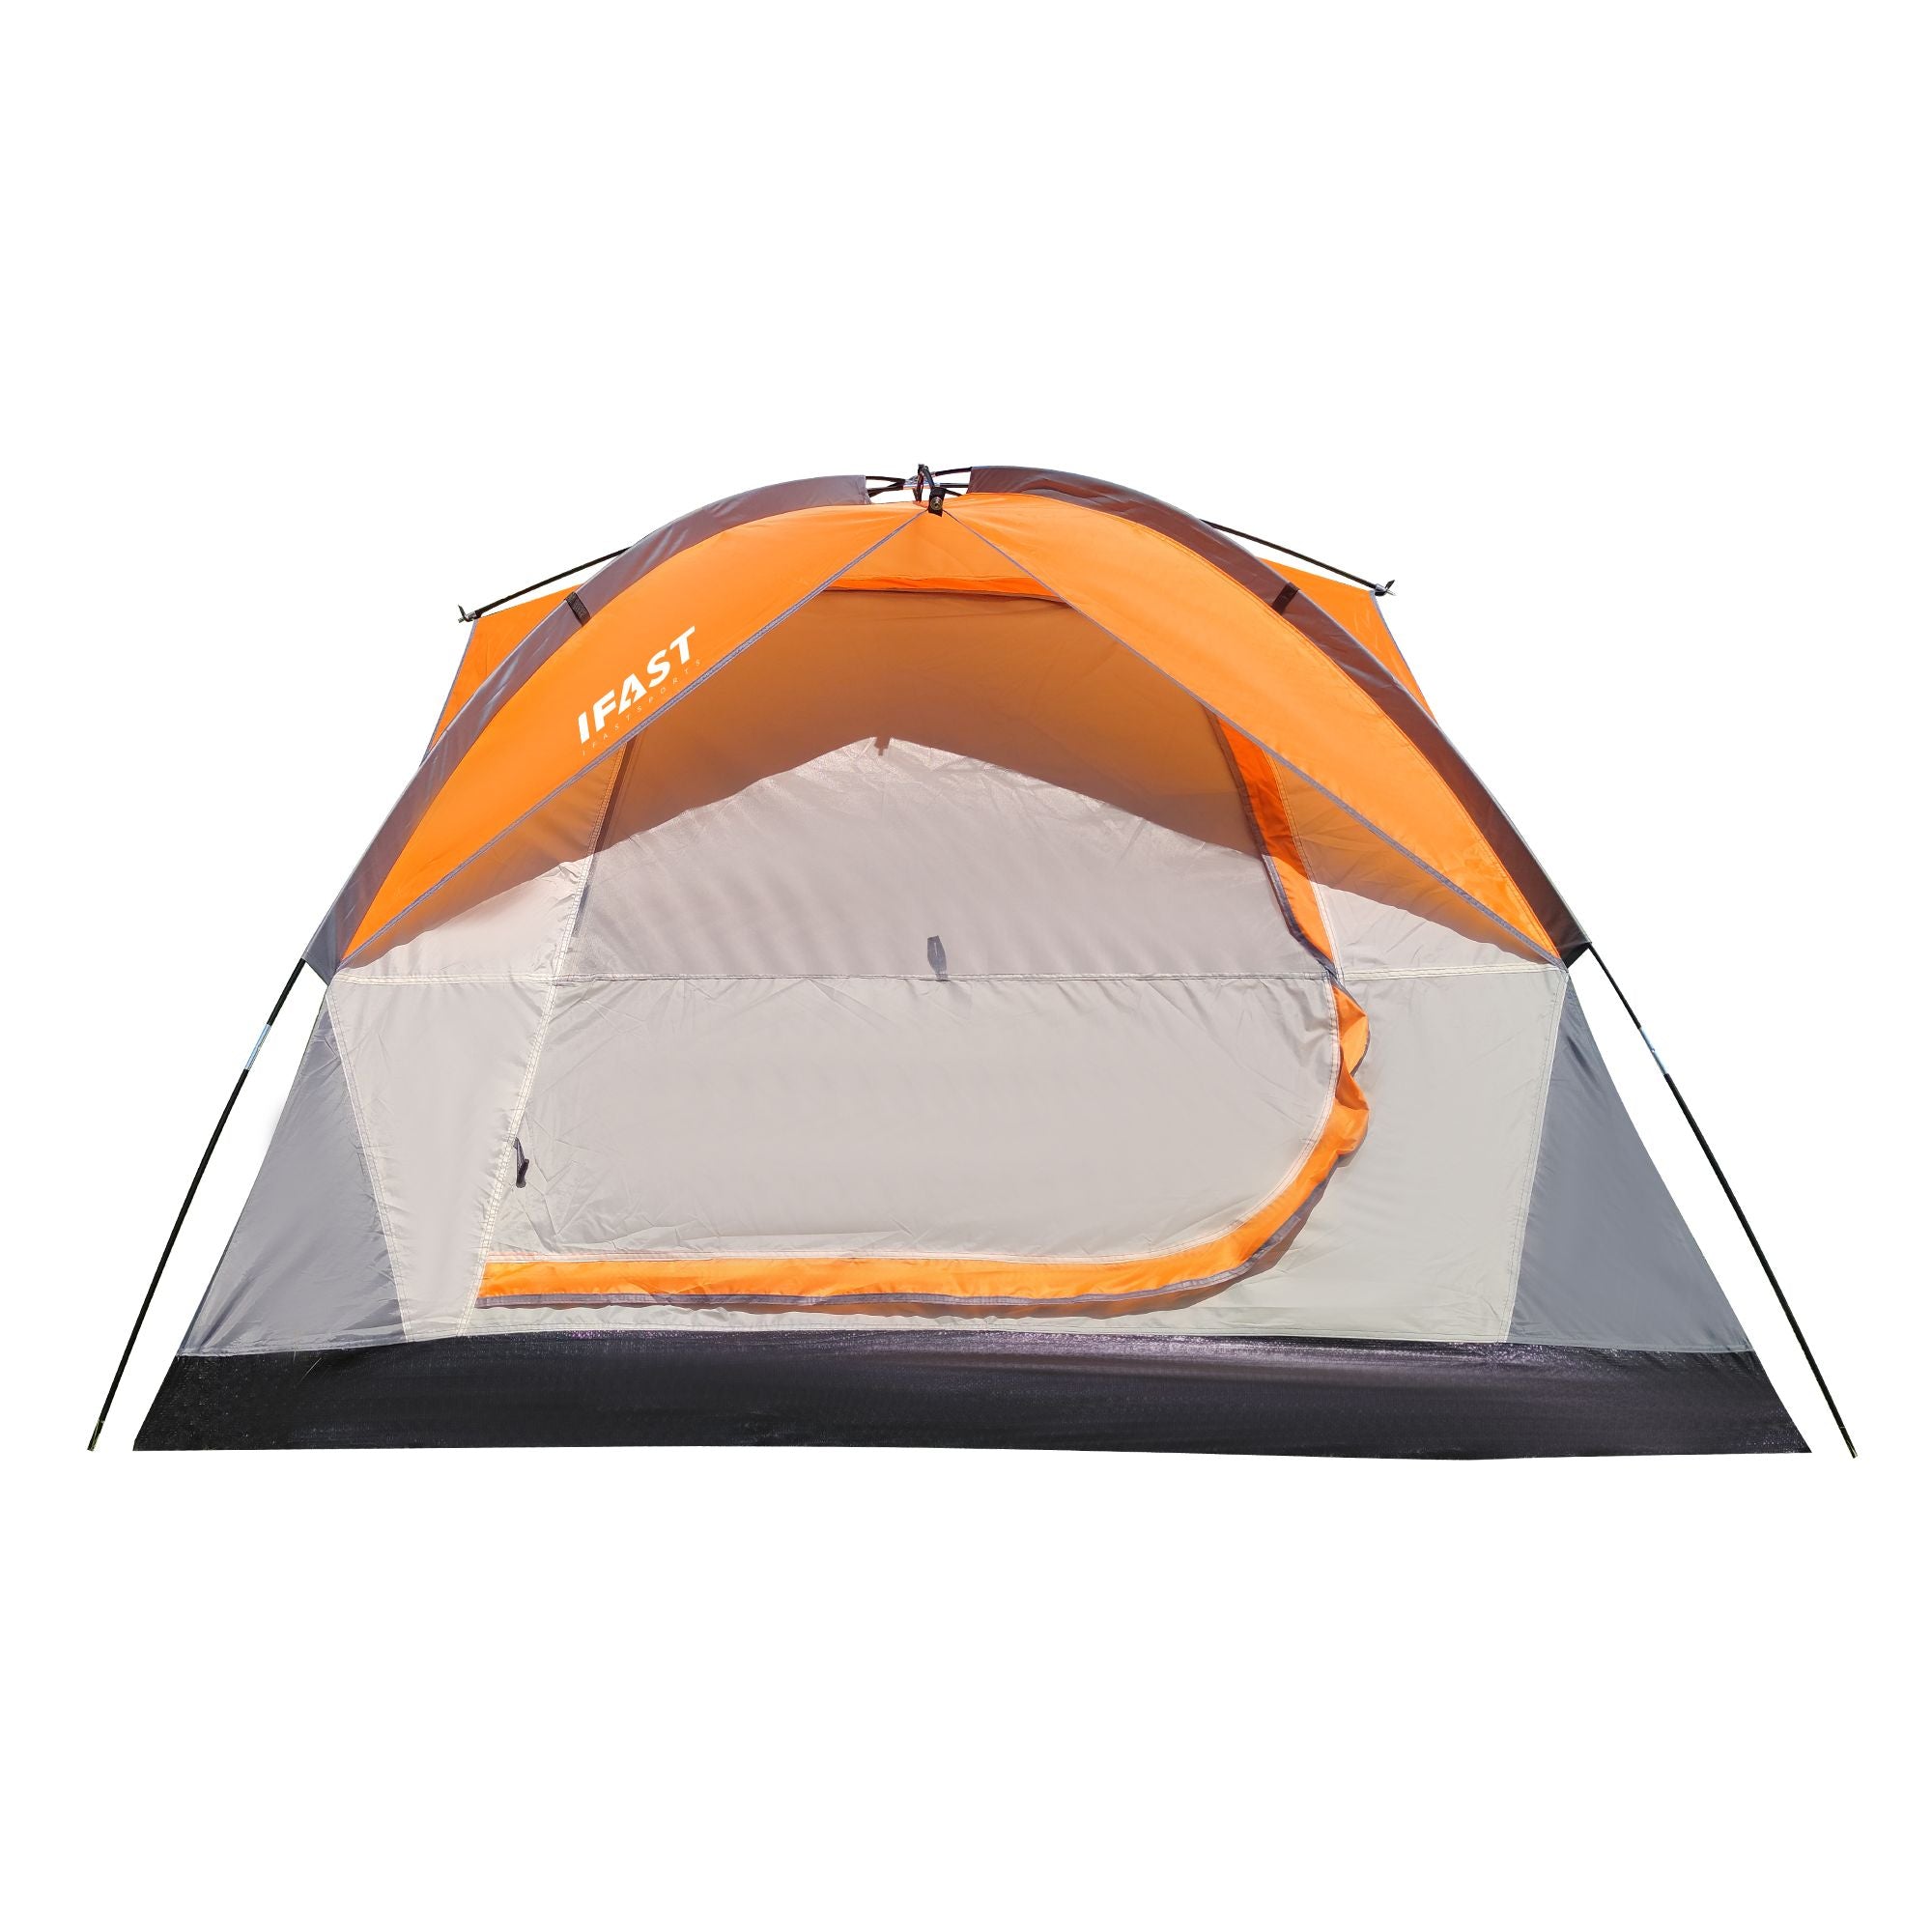 ifast family camping tent